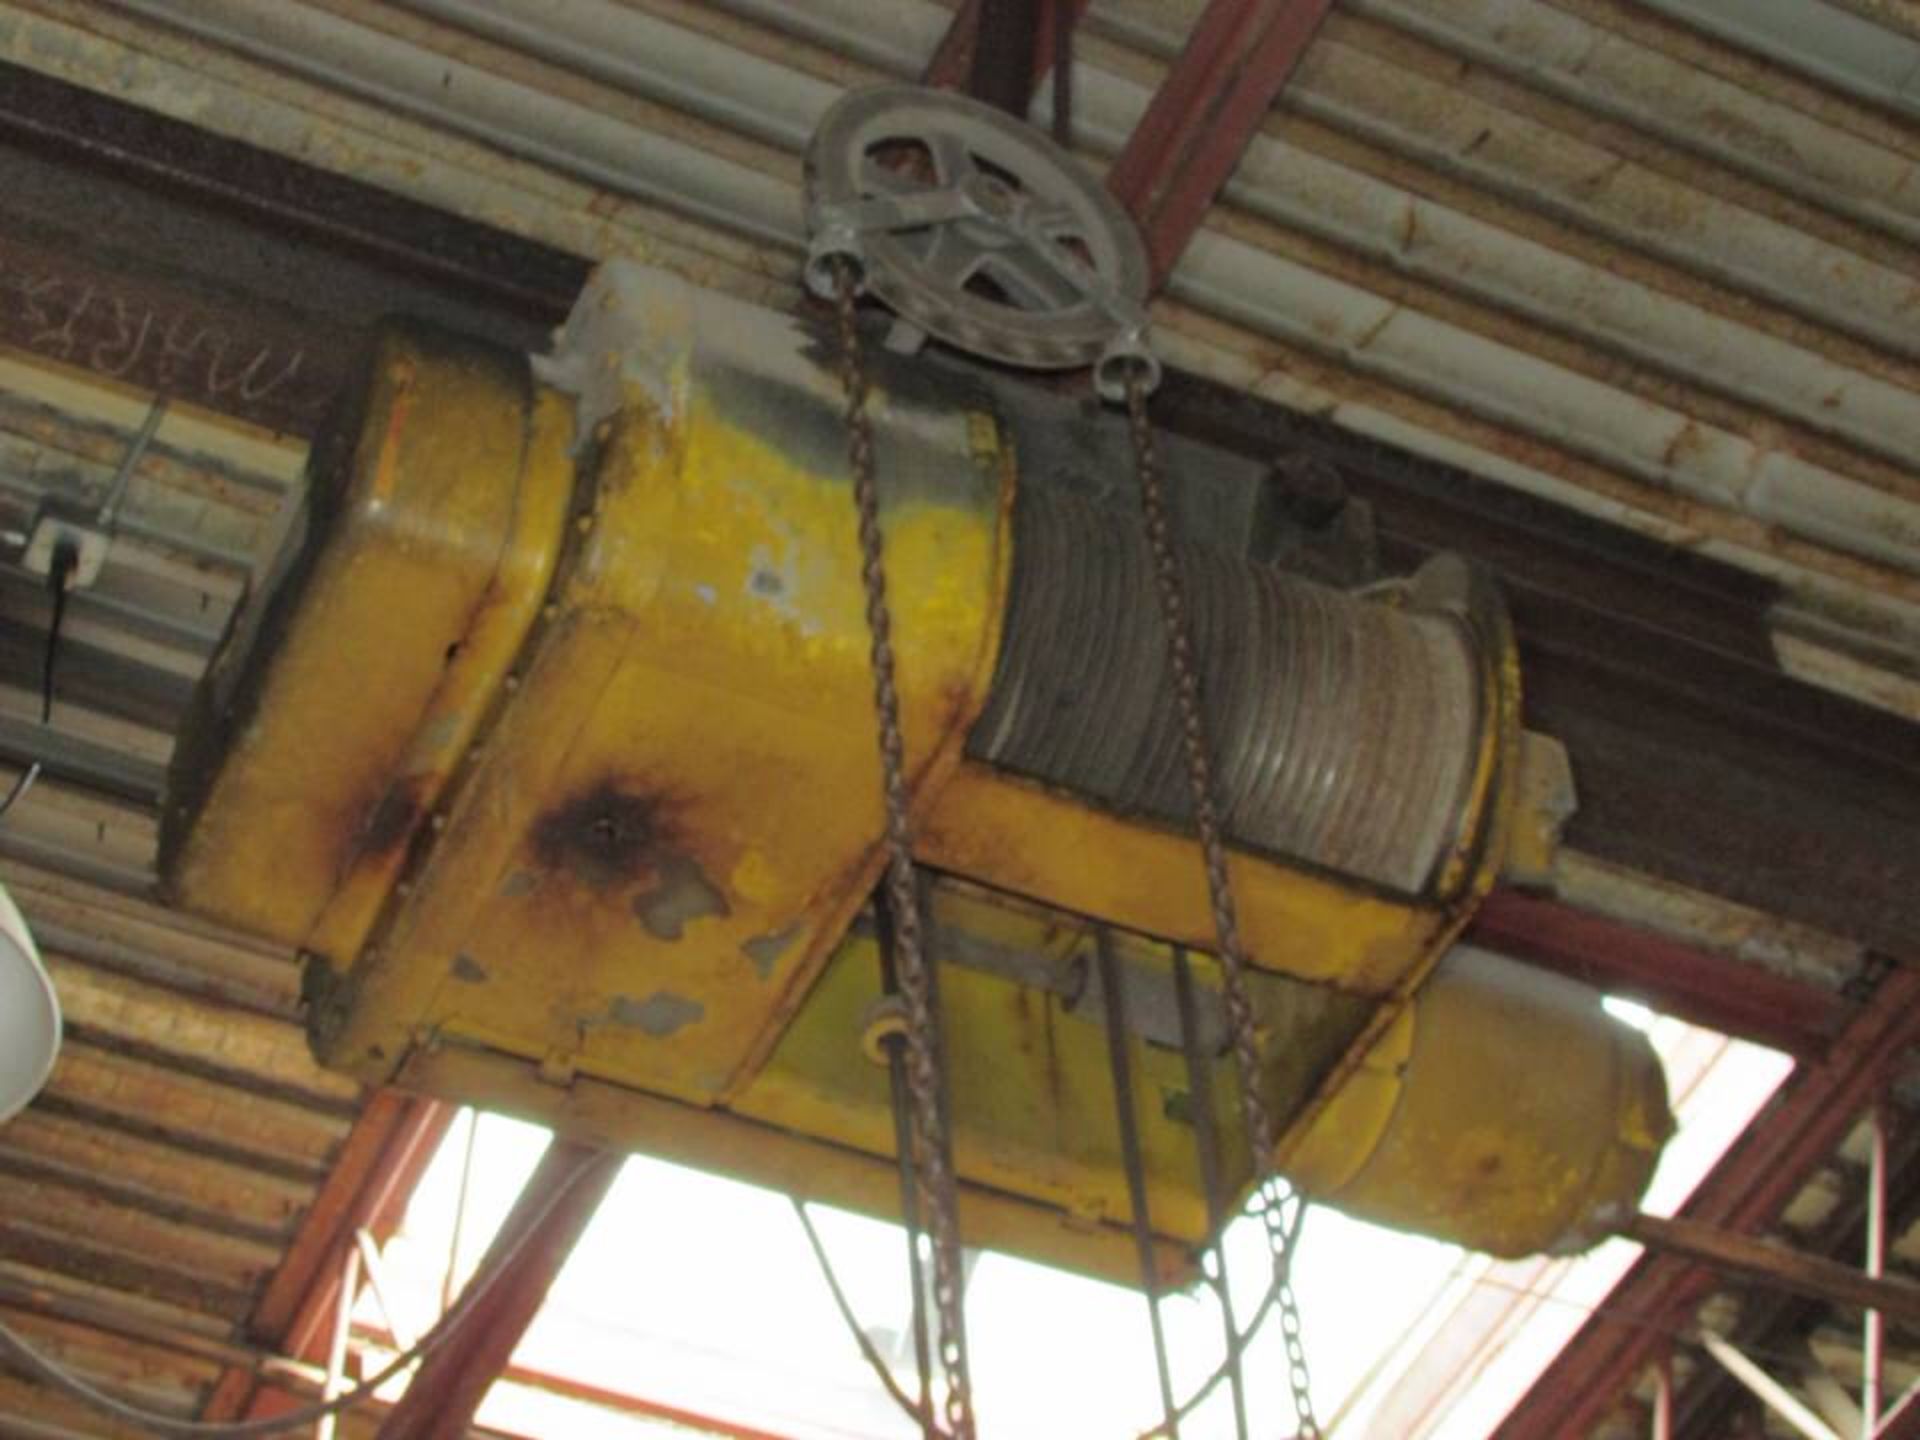 Load Lifter 8-Ton Electric Braided Cable Hoist; with Manual Trolley and 2-Button Control Pendant ( - Image 2 of 5